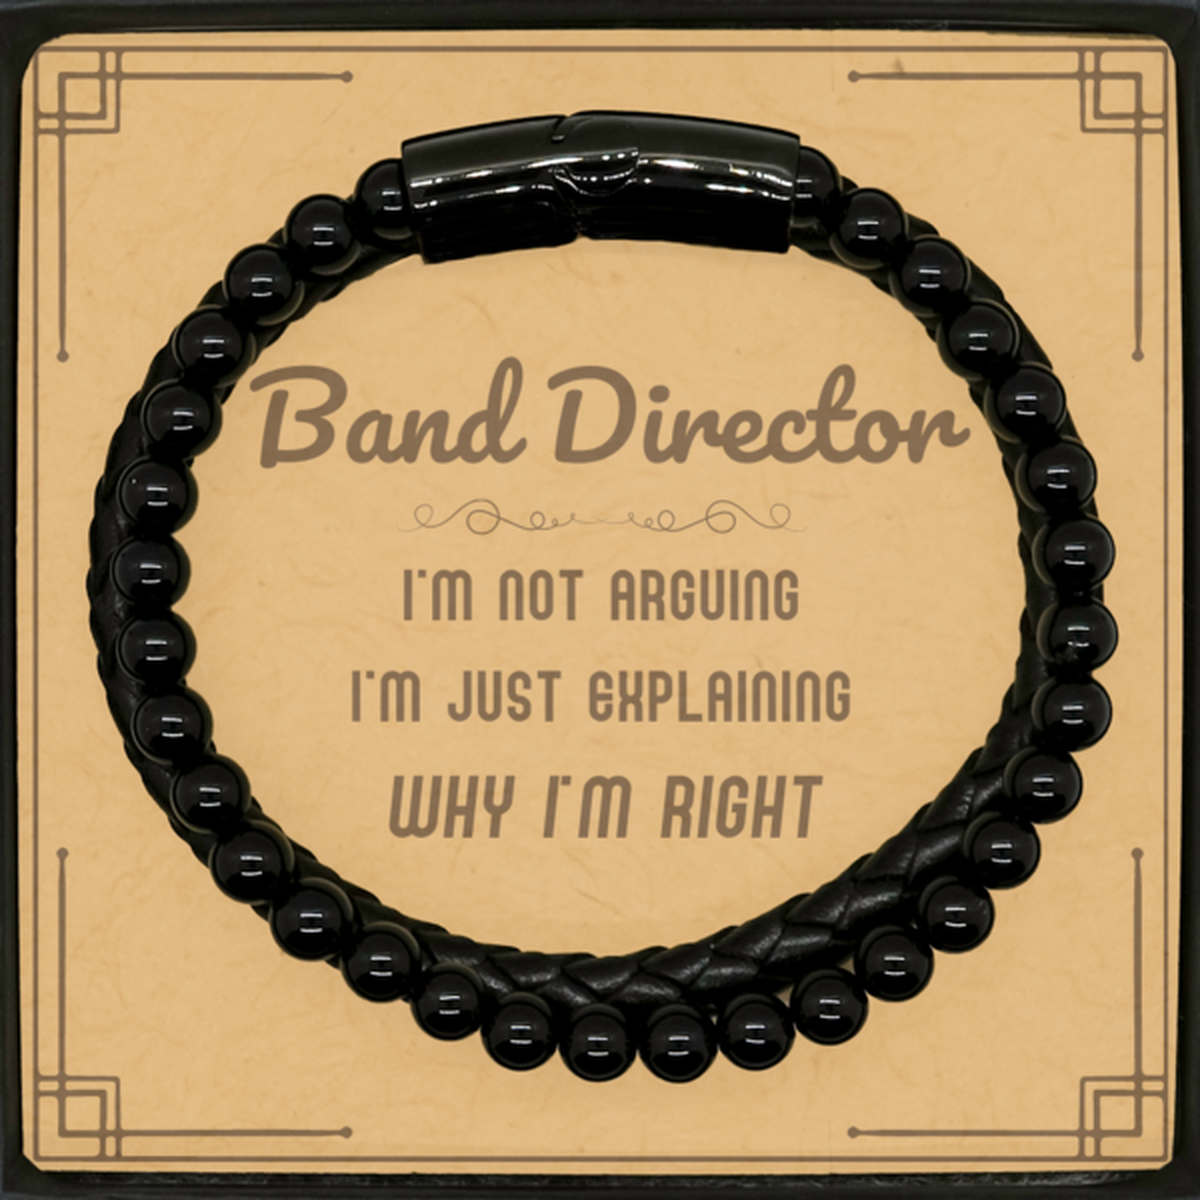 Band Director I'm not Arguing. I'm Just Explaining Why I'm RIGHT Stone Leather Bracelets, Funny Saying Quote Band Director Gifts For Band Director Message Card Graduation Birthday Christmas Gifts for Men Women Coworker